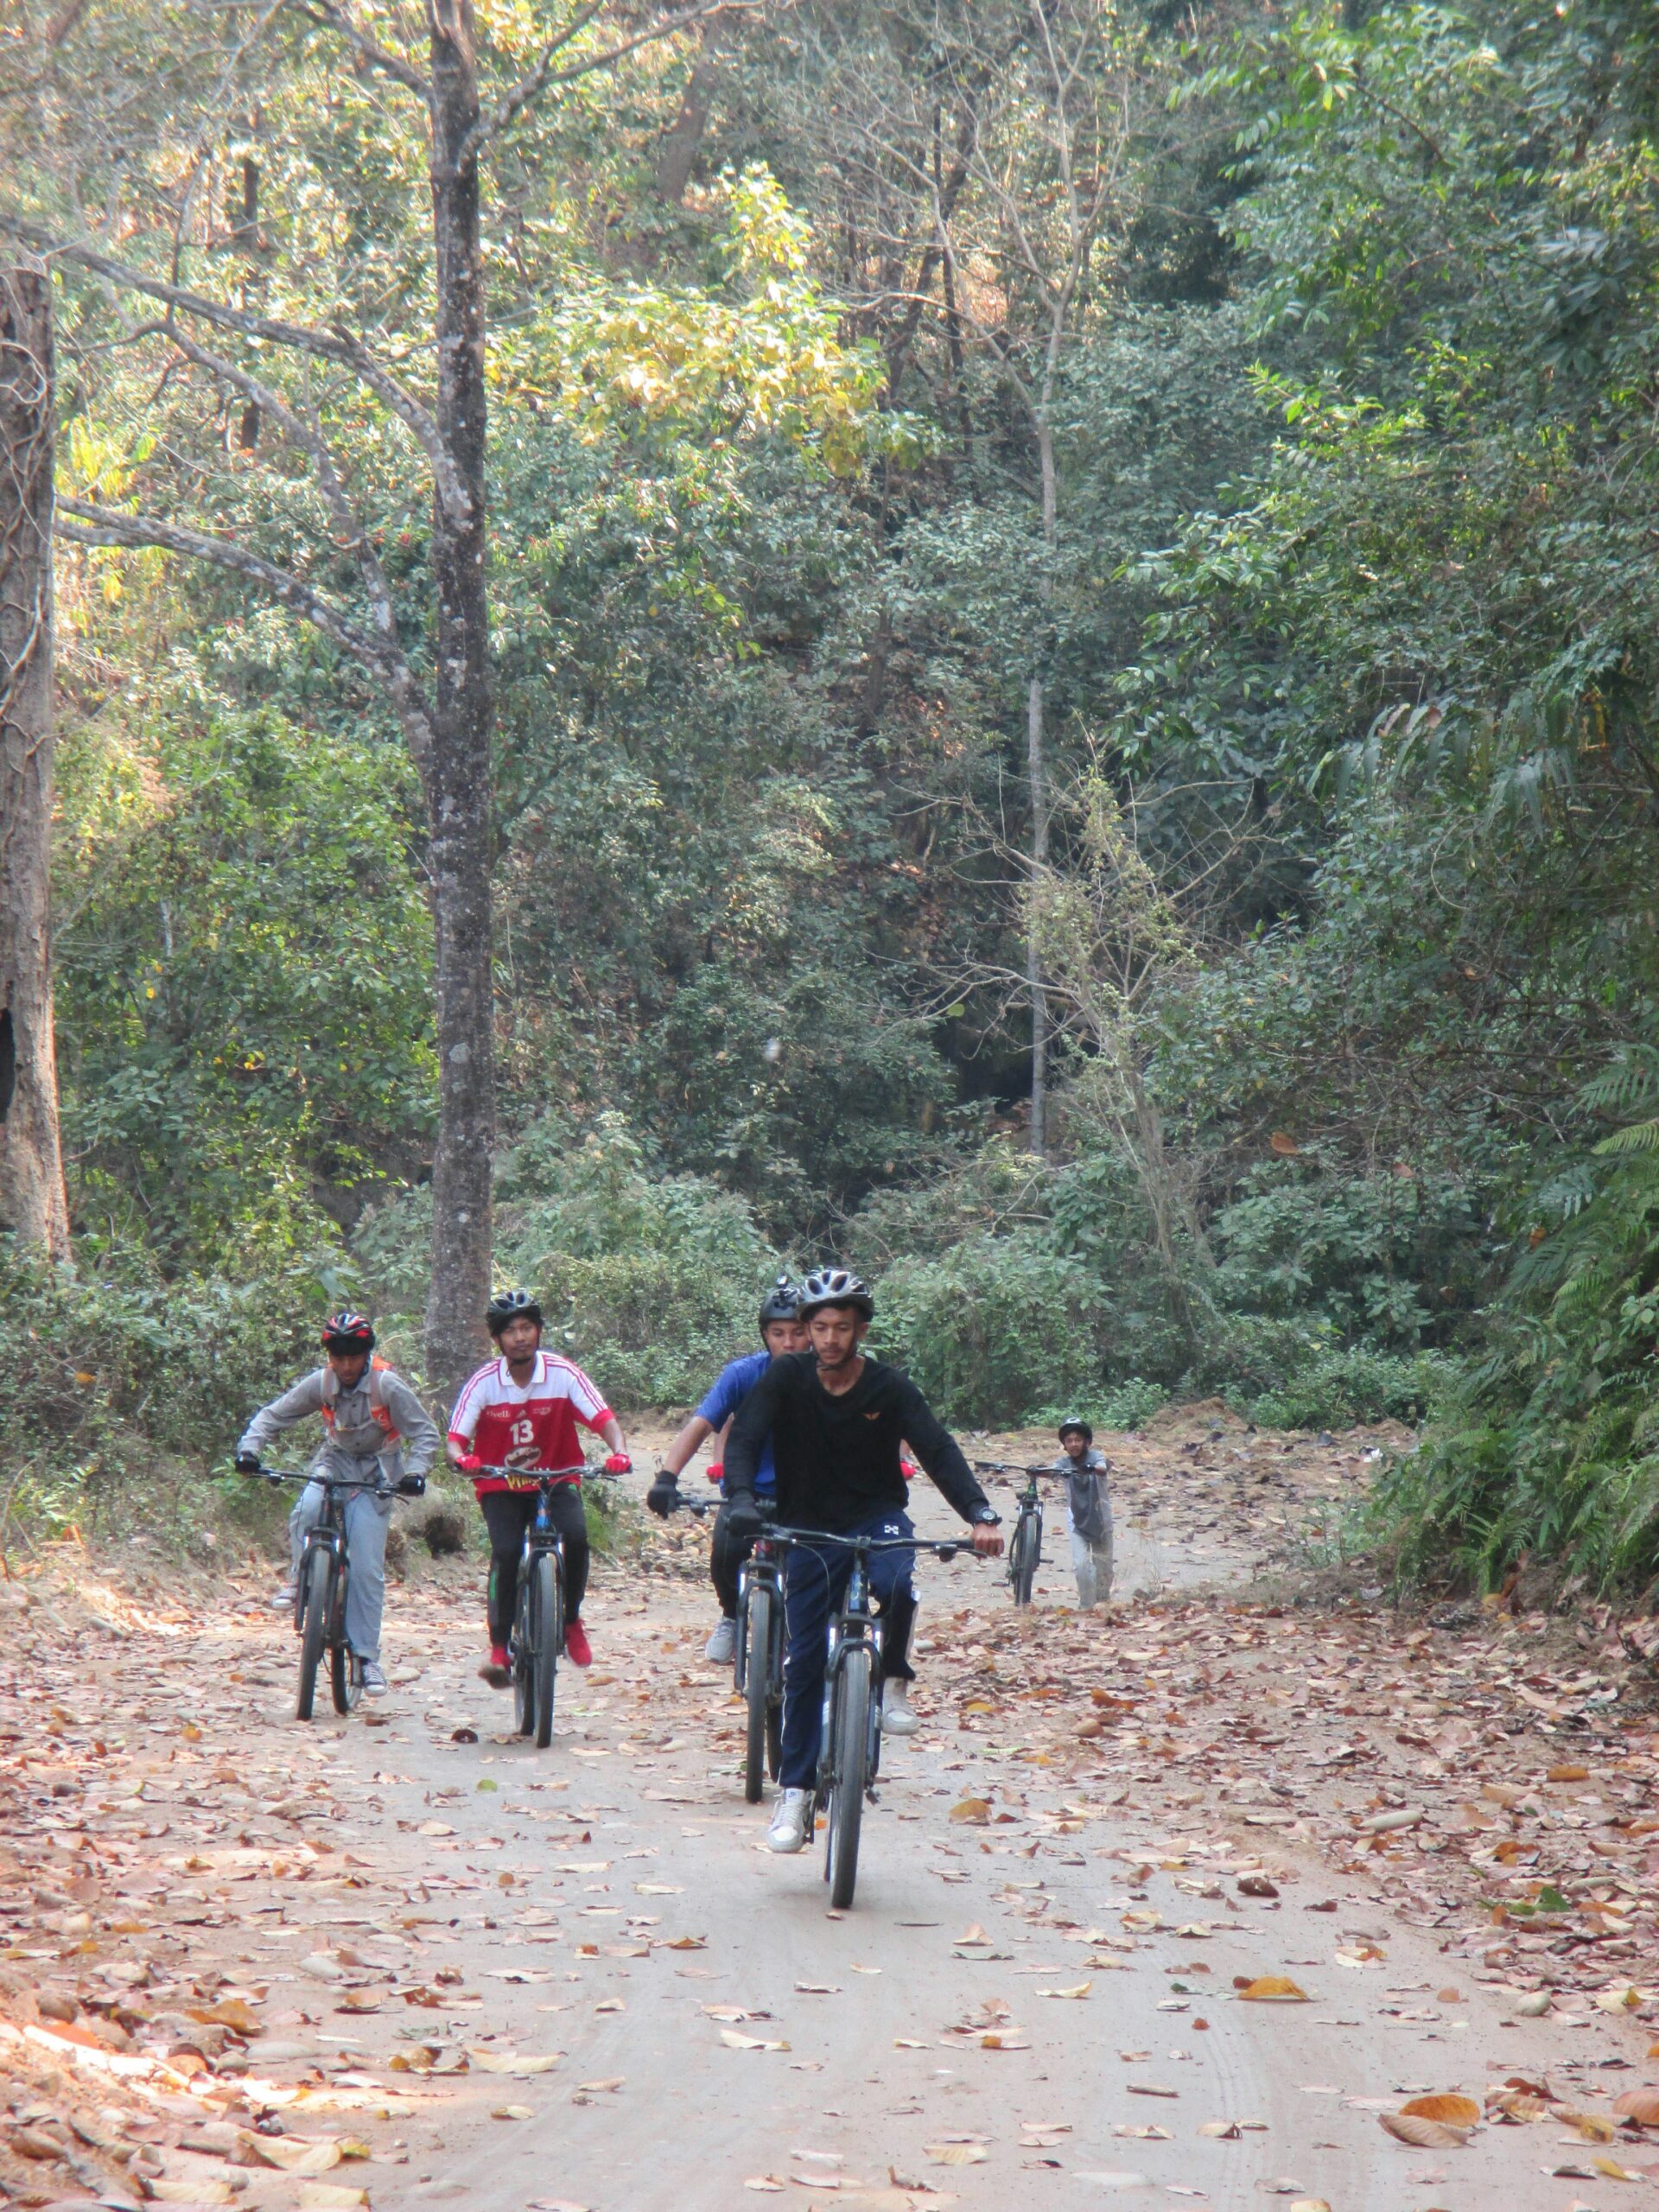 a group of people riding bikes down a leaf covered road